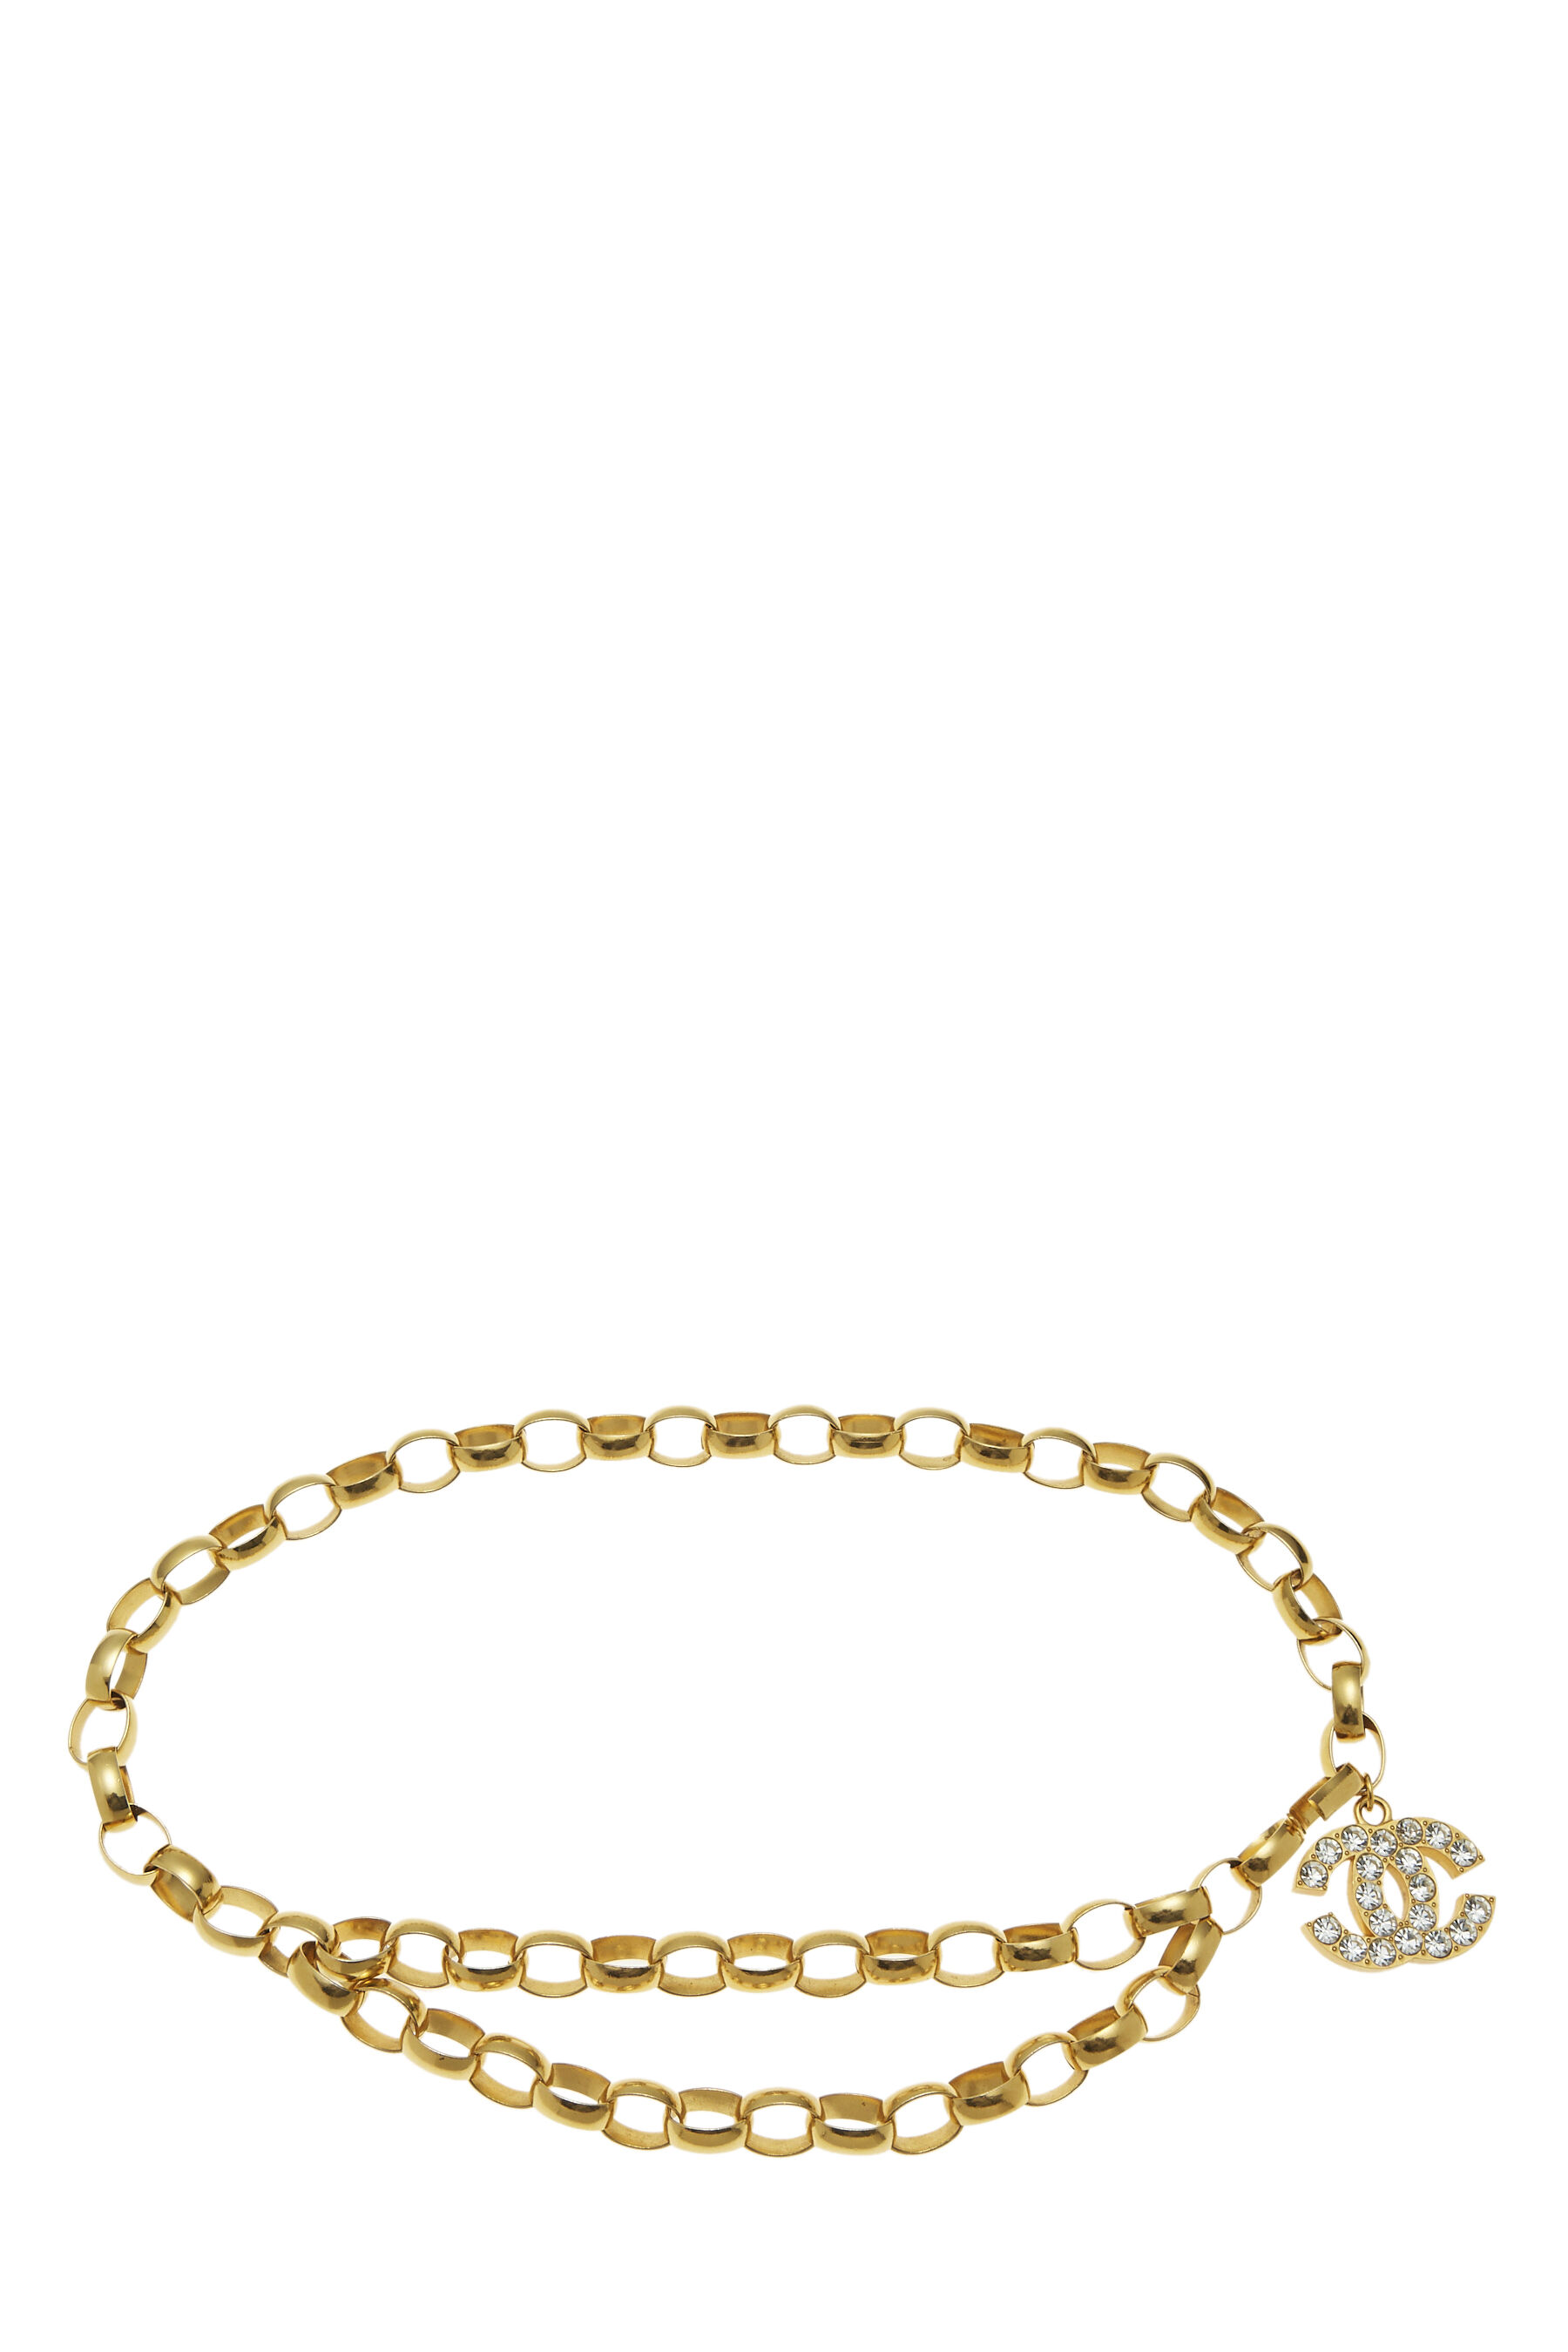 Chanel Belt Vintage Gold Link Chain Chanel Name Spelled Out – Mightychic